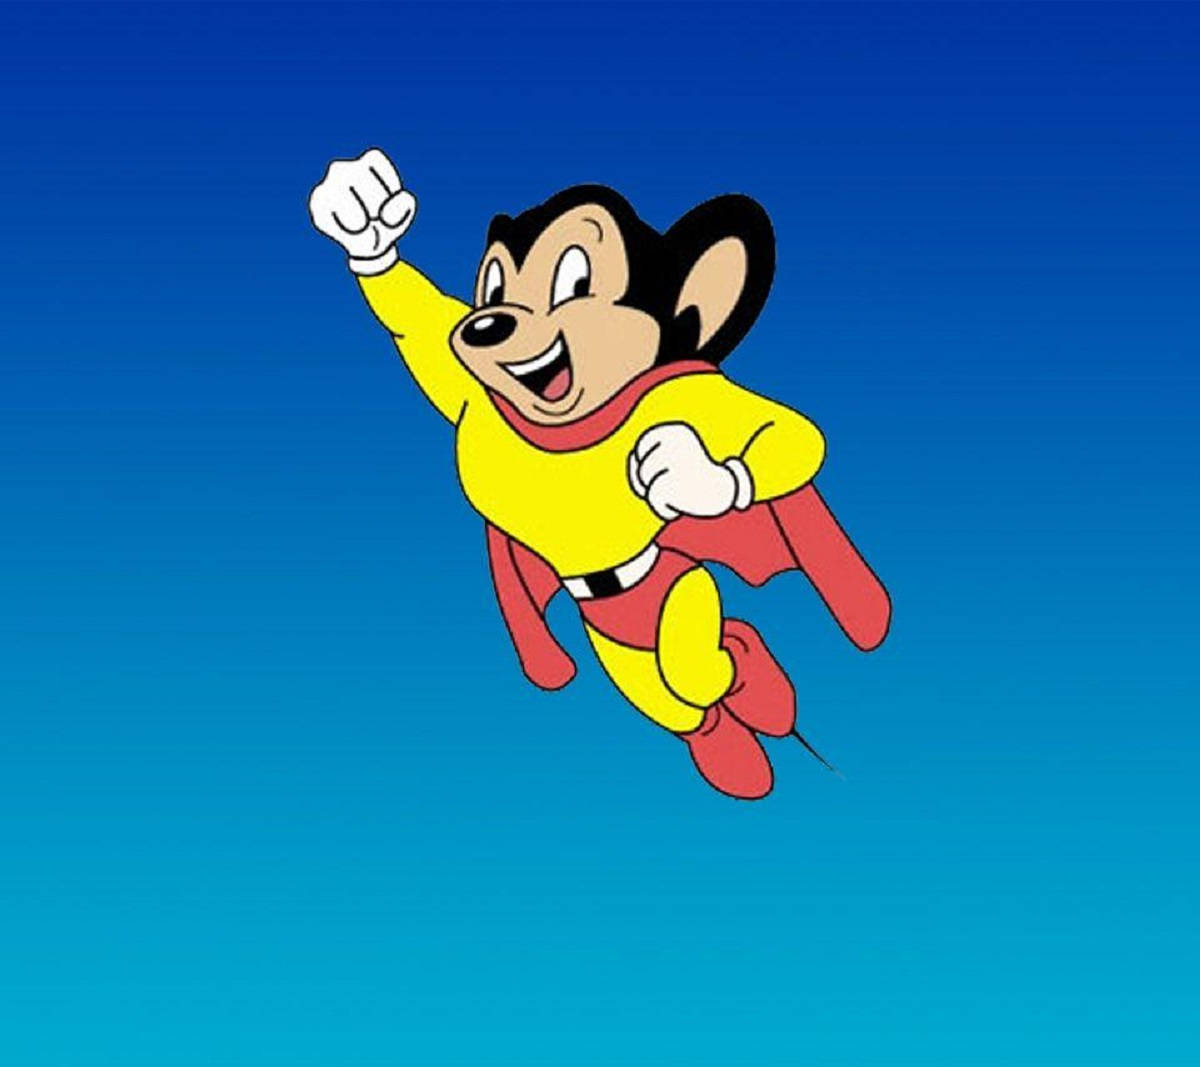 Classic Mighty Mouse Cartoon Pose Background